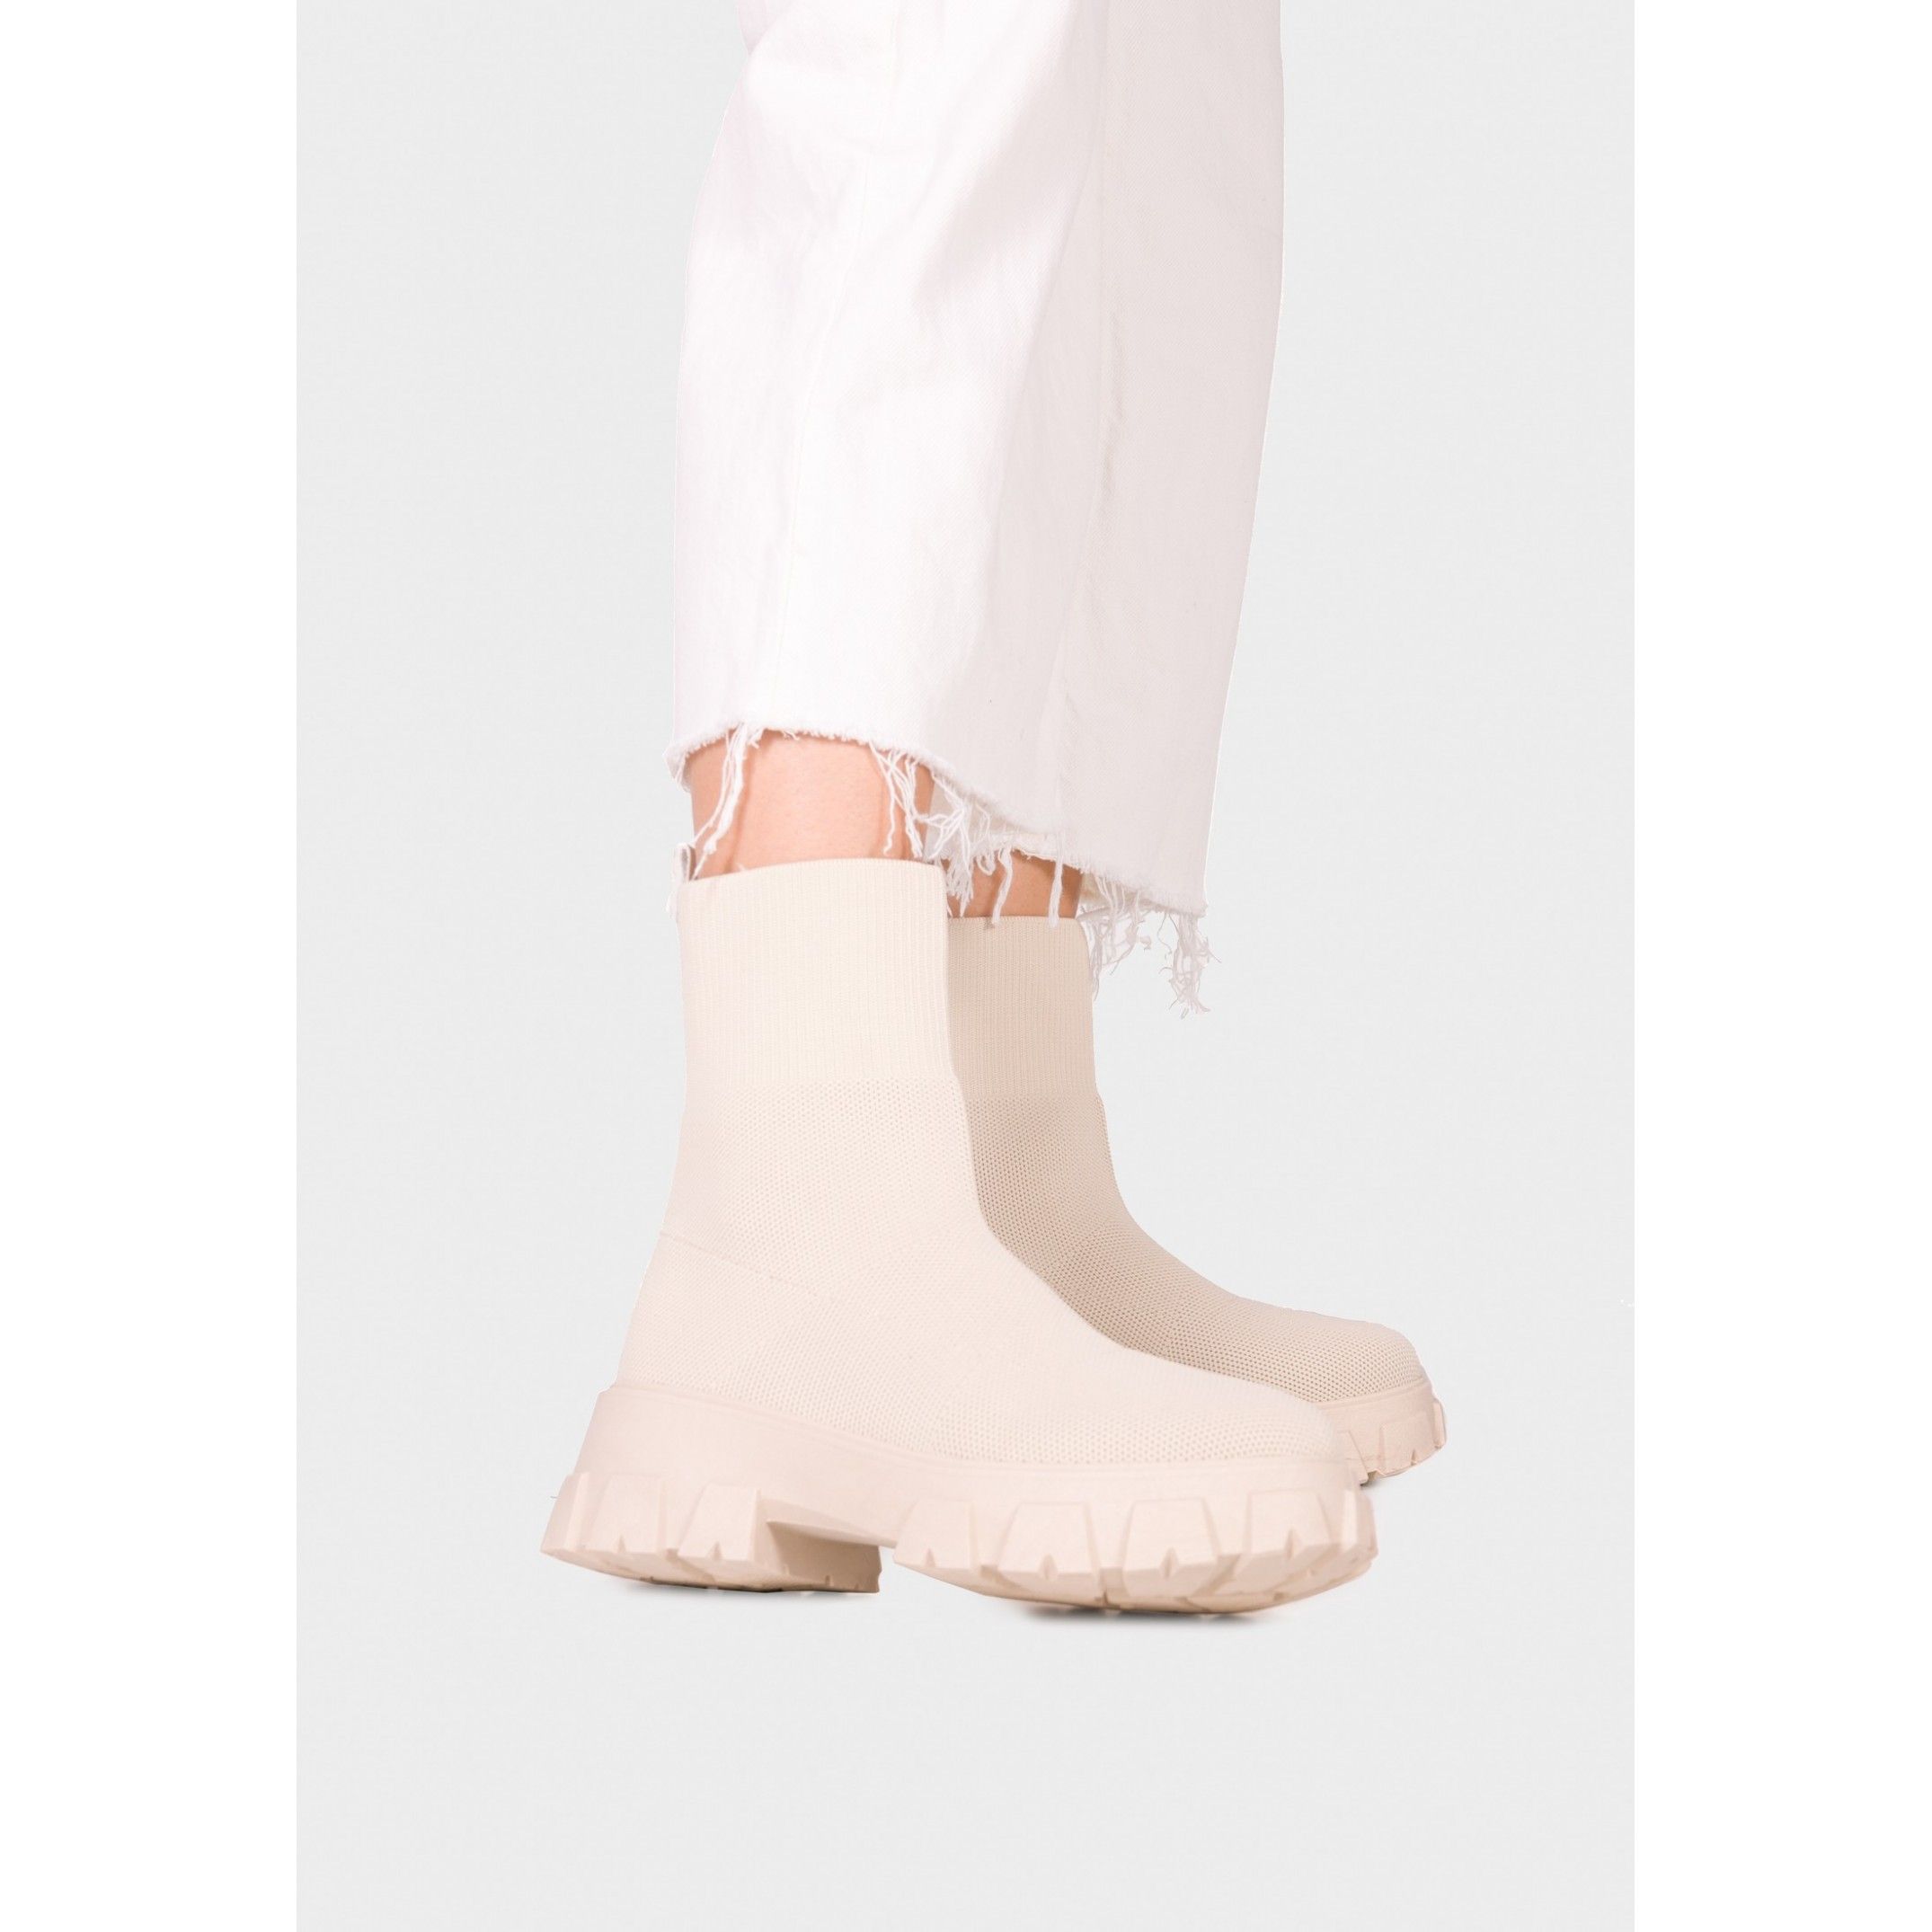 Sock ankle boot by María Barceló. Closure: elastic. Upper: textile. Inner: textile. Insole: textile. Sole: non-slip. Heel: 3 cm.